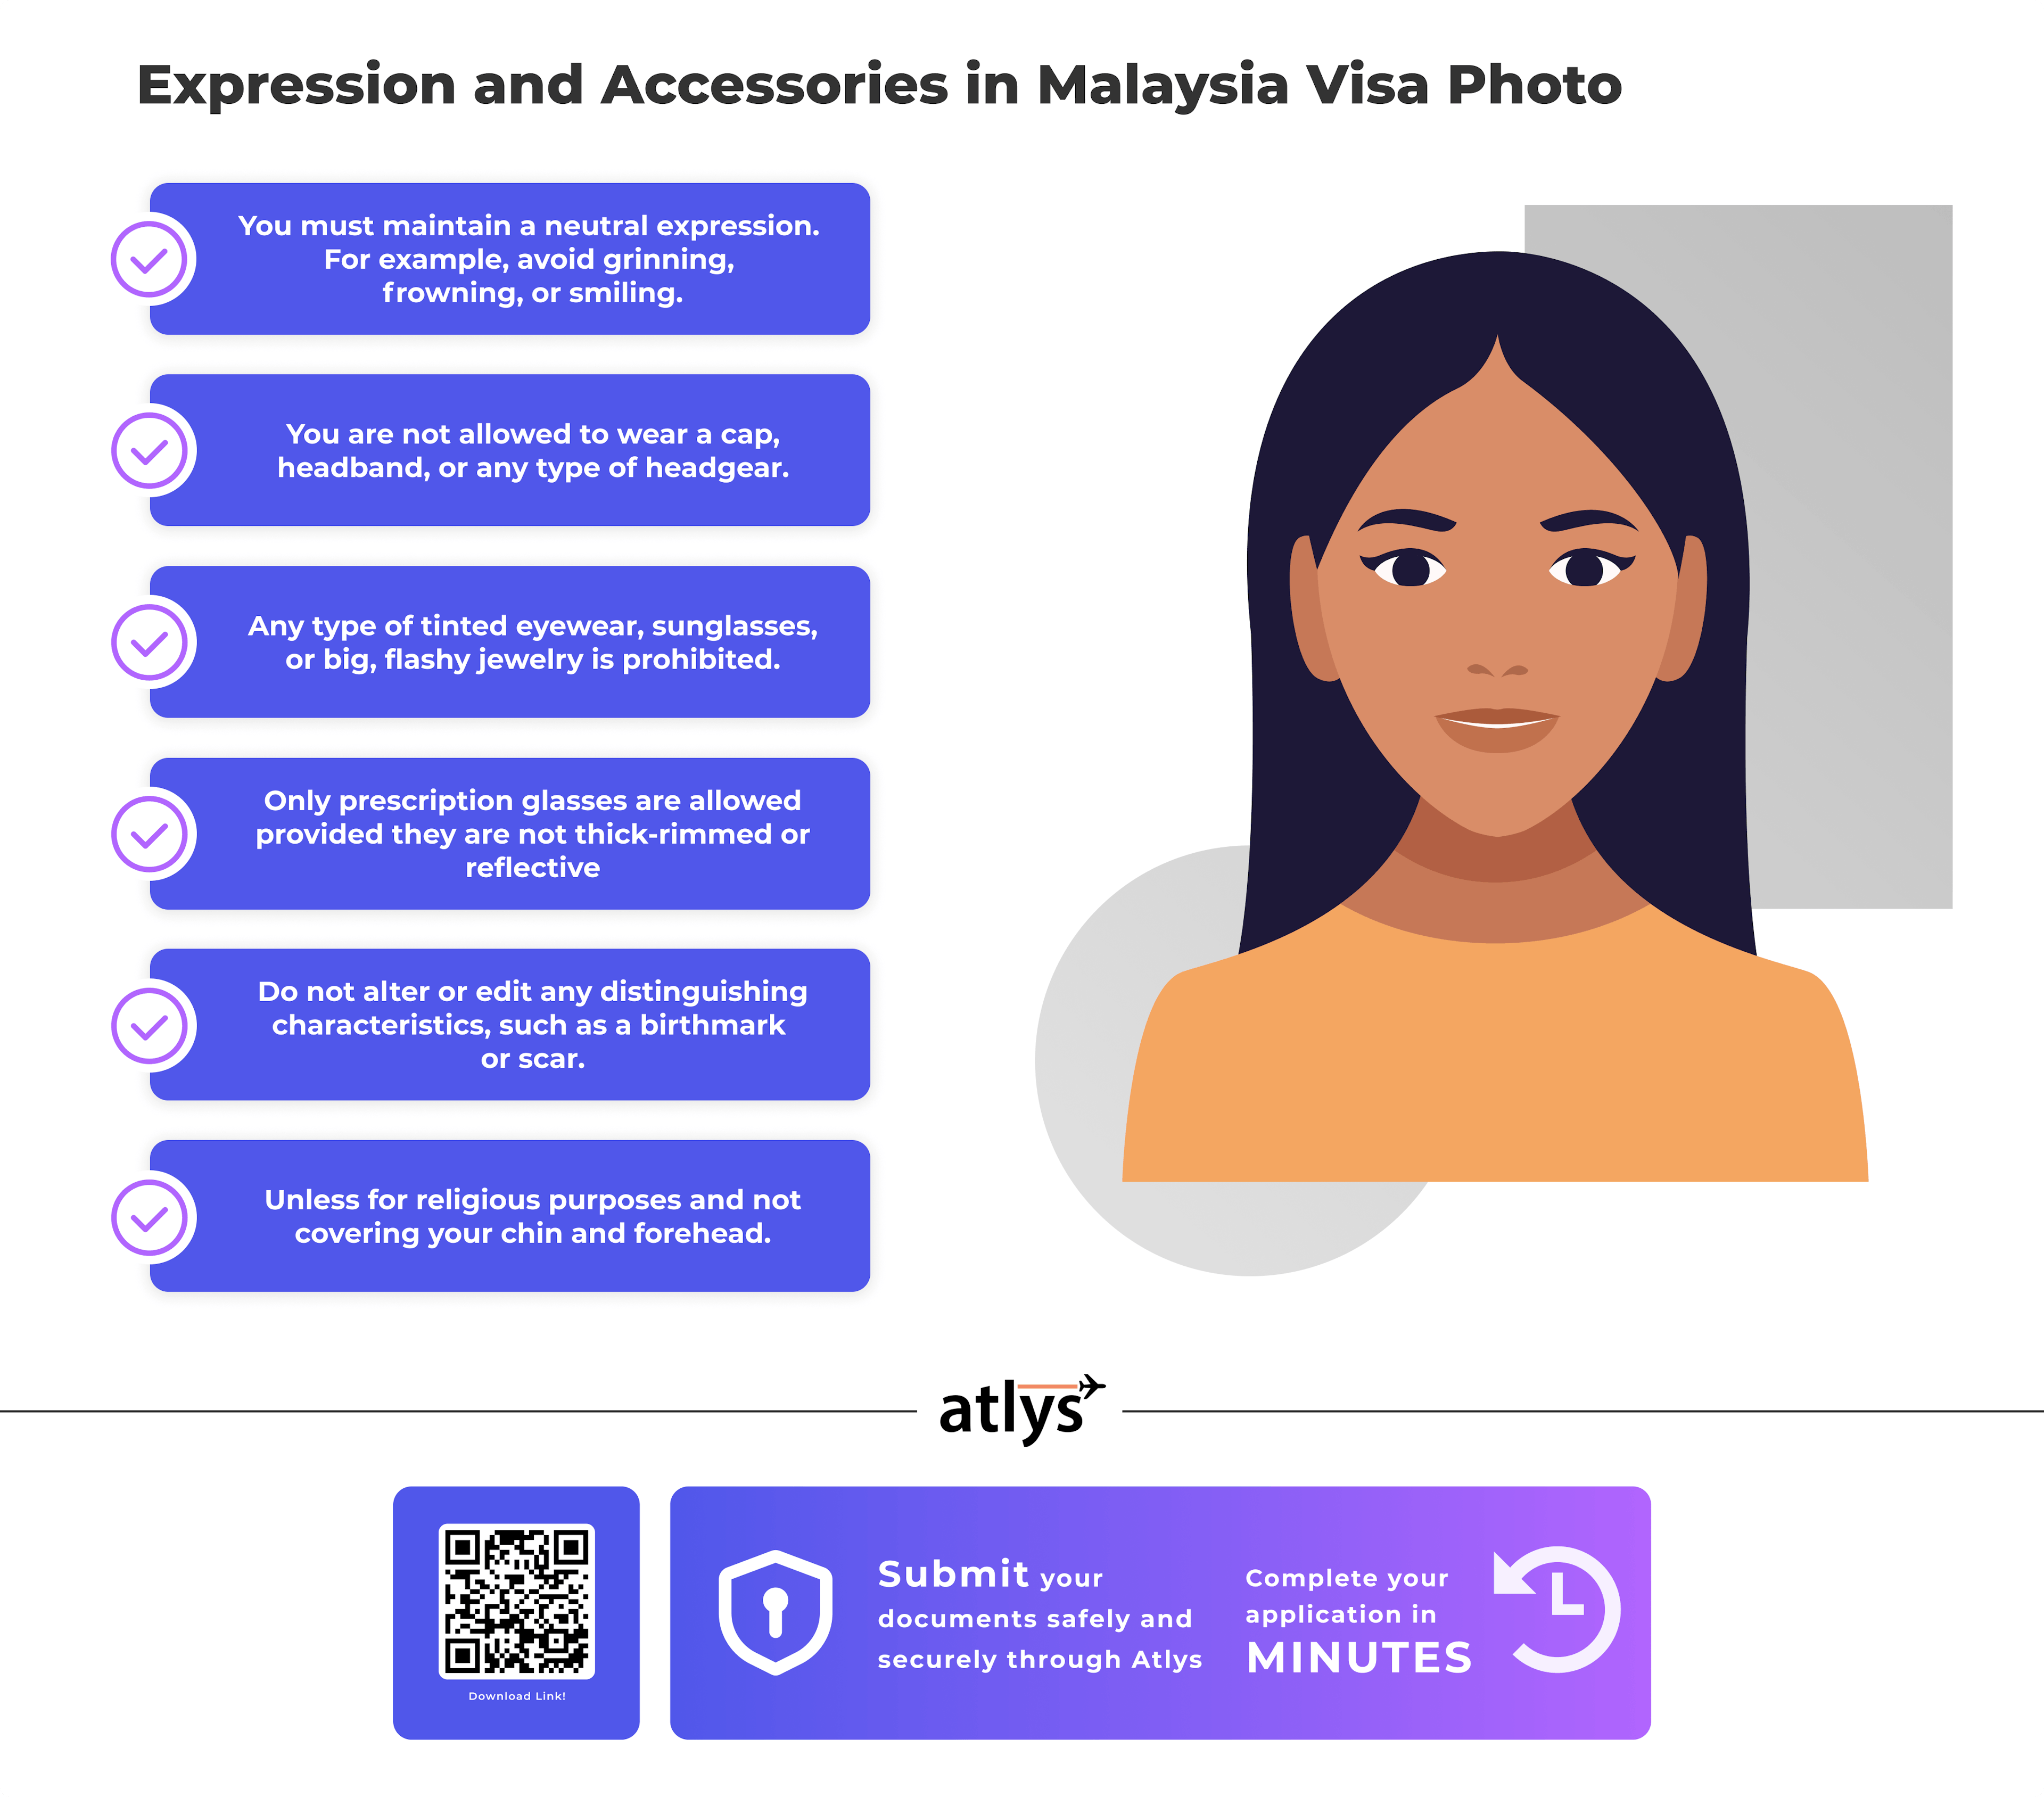 Malaysia visa photo requirements for Indians.